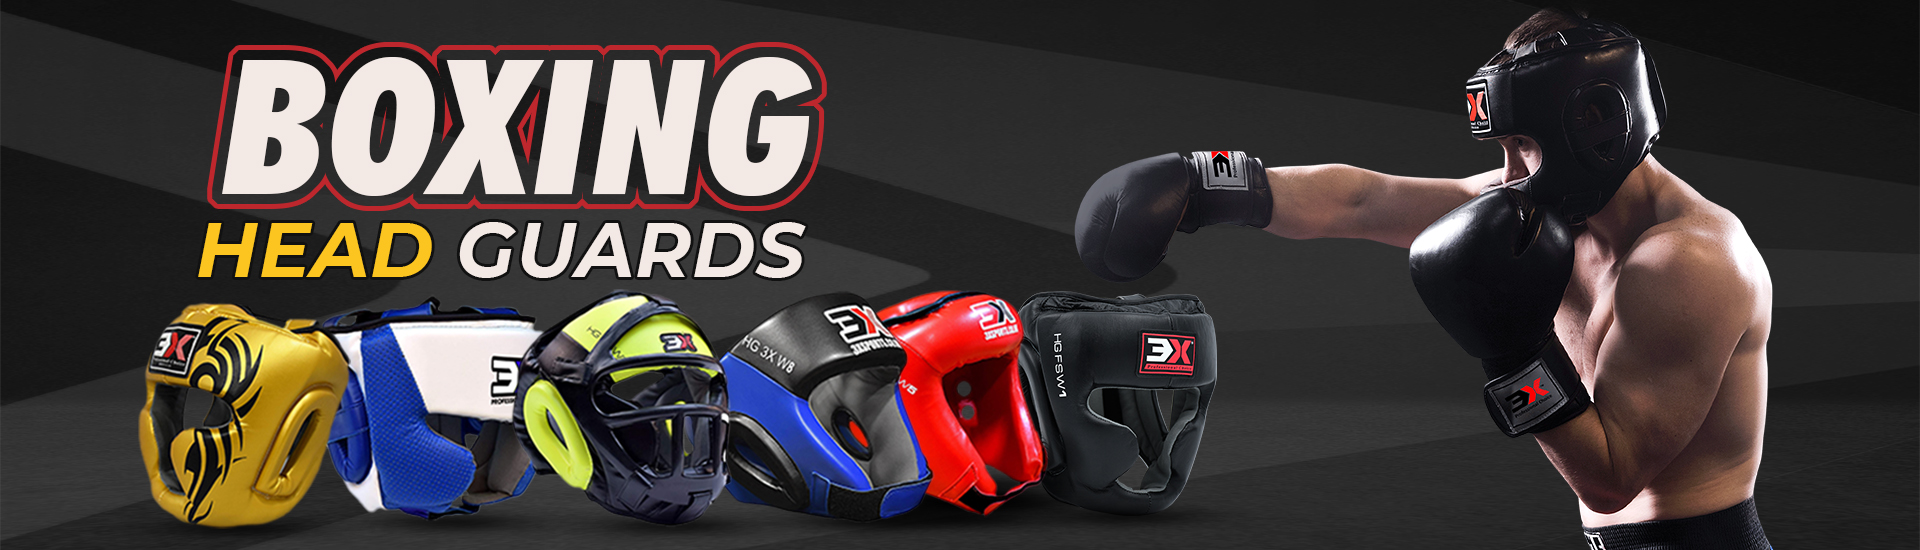 Boxing, Gloves, Pads, Clothing, Footwear & Equipment